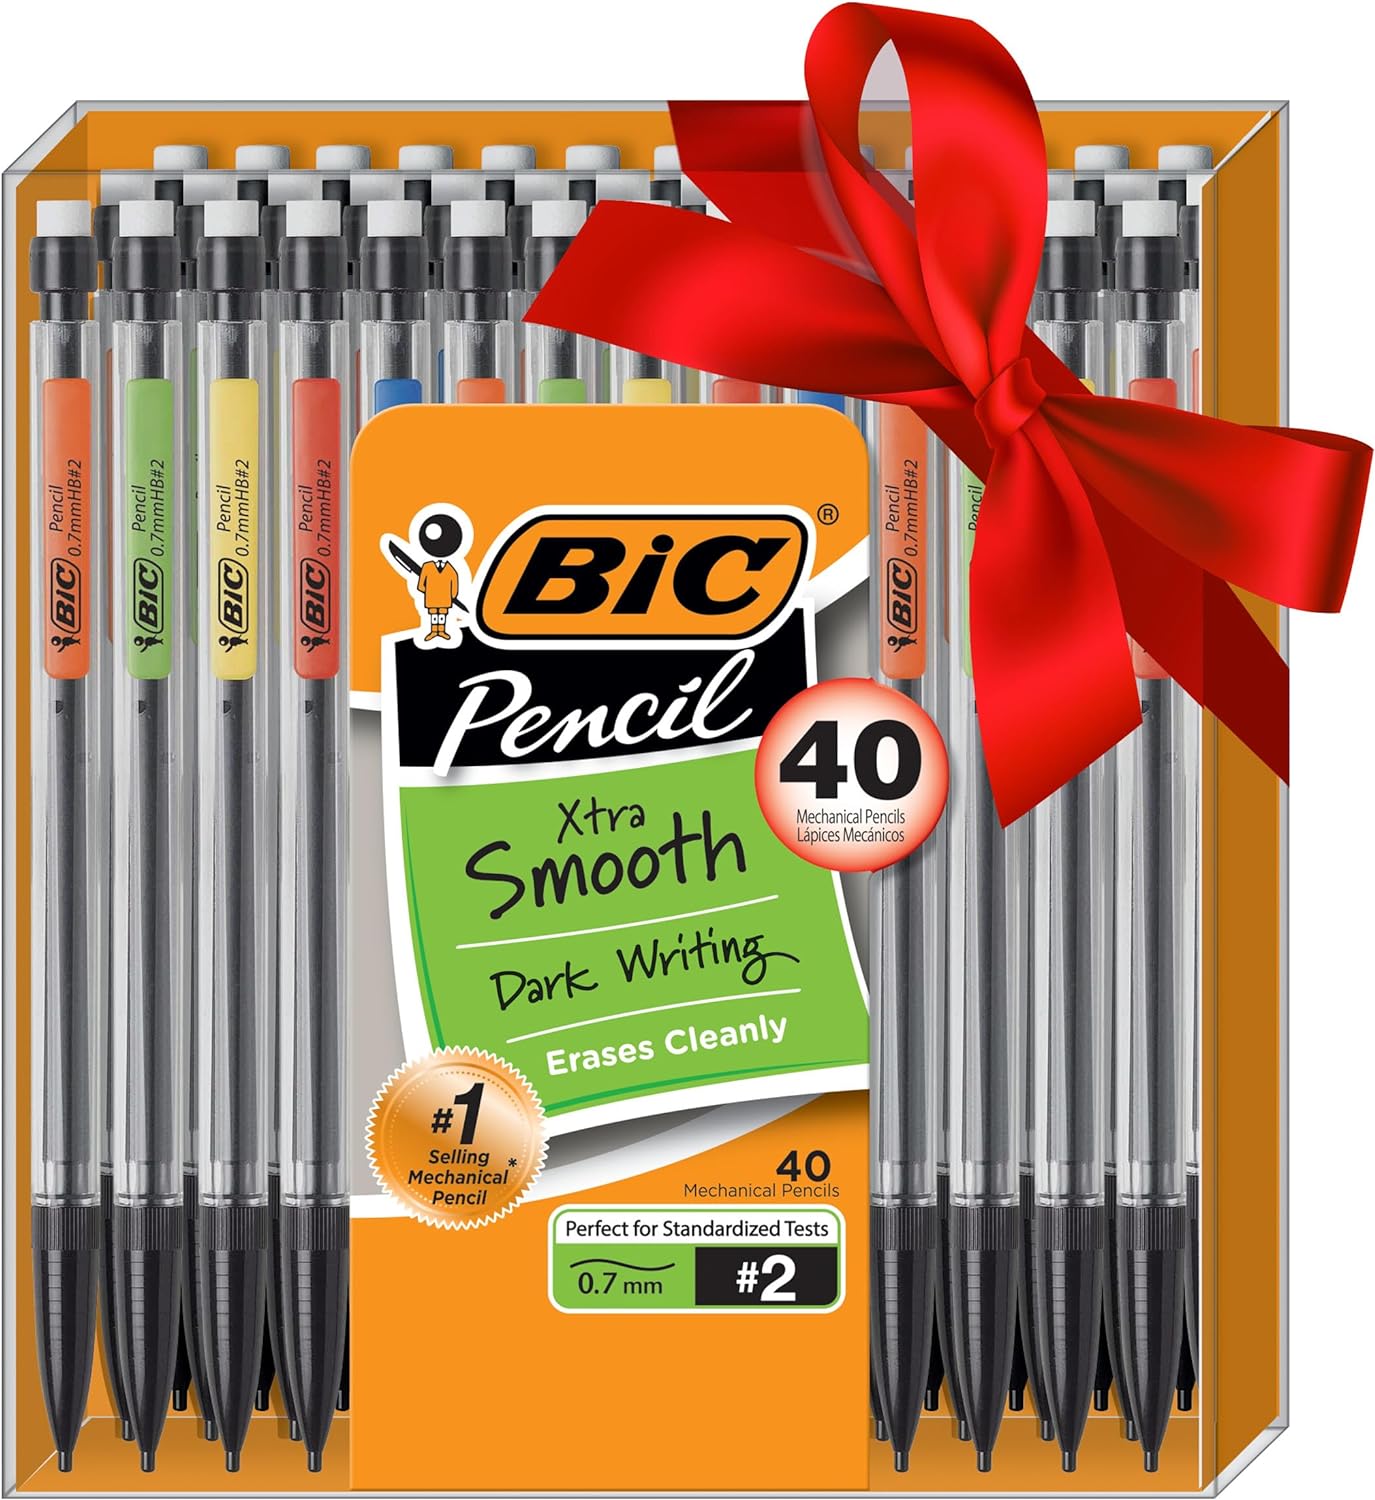 I was stunned at the price for a big pack of pencils like this. They are great for the school year. Very smooth, good quality graphite, easy to use. Love the bright colors. The only complaint I have is they aren't very ergonomic. I assume hands will get sore after holding the pencil for a long time.